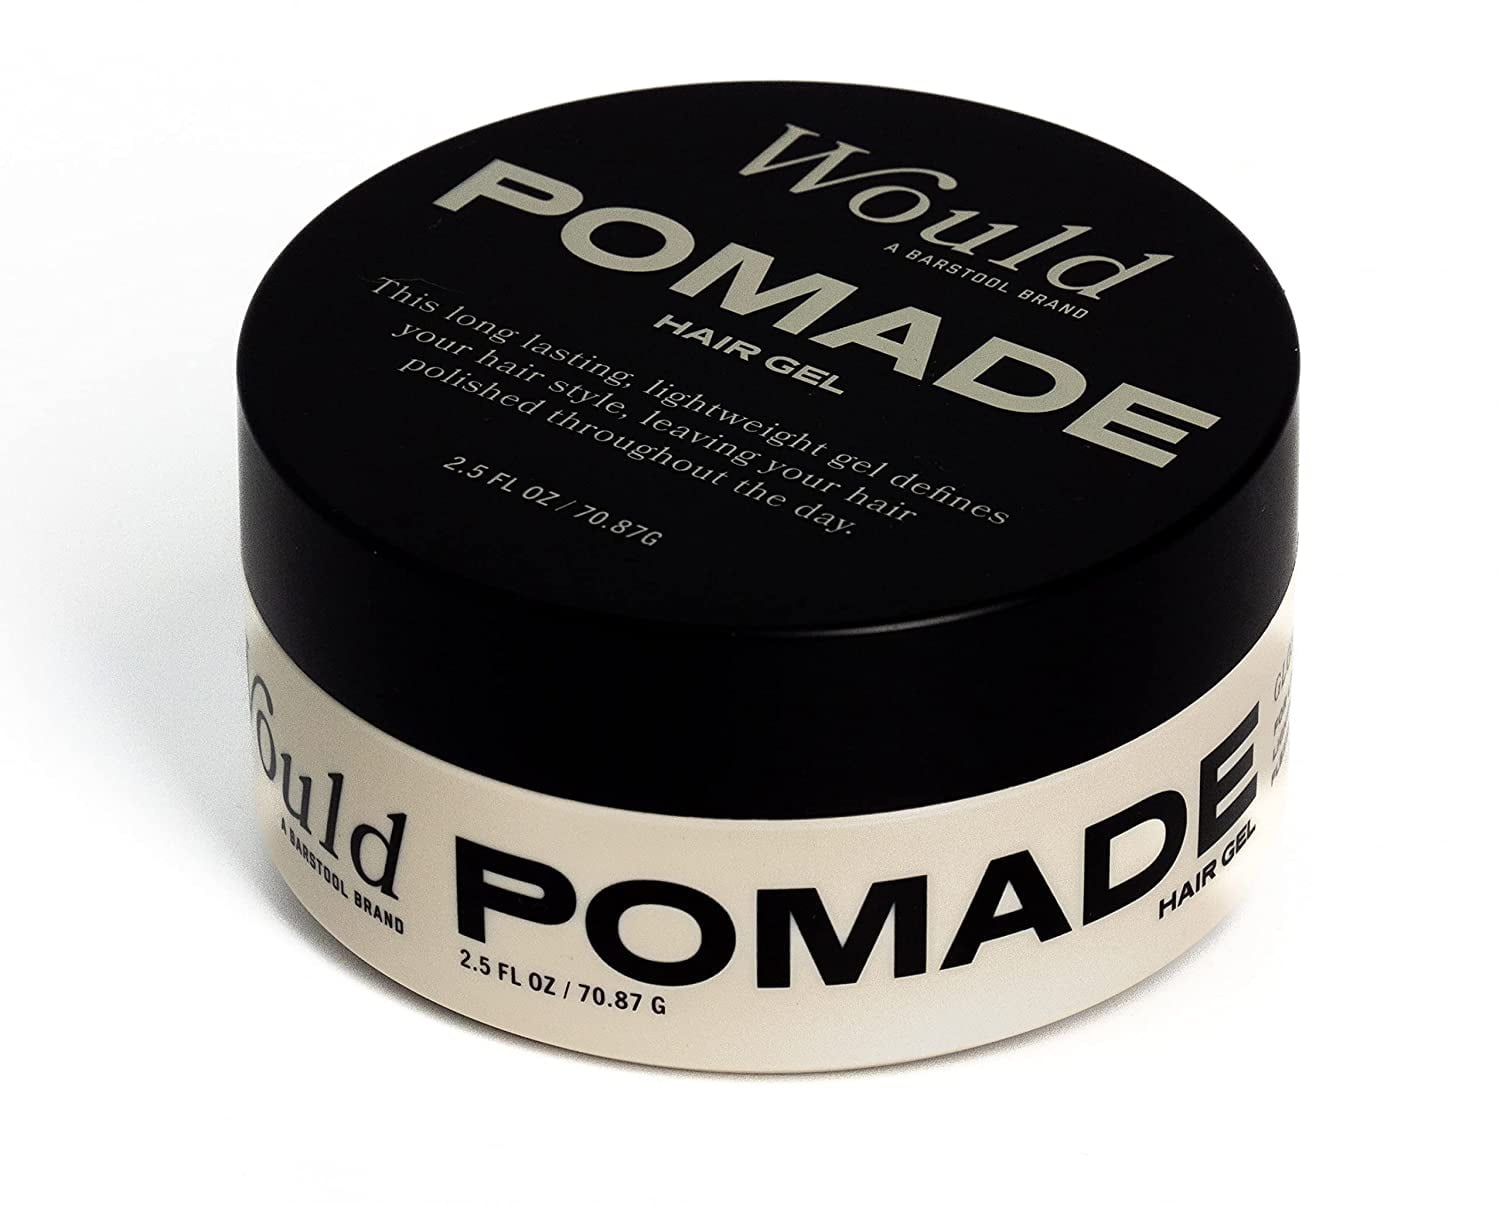 Would Pomade Hair Gel for Men by Barstool Sports,  fl. oz., Natural  Matte or Glossy Finish in Cream or Gel Forms, Water Based Medium Hold,  Lightweight, Flexible, Soft Touch, No White